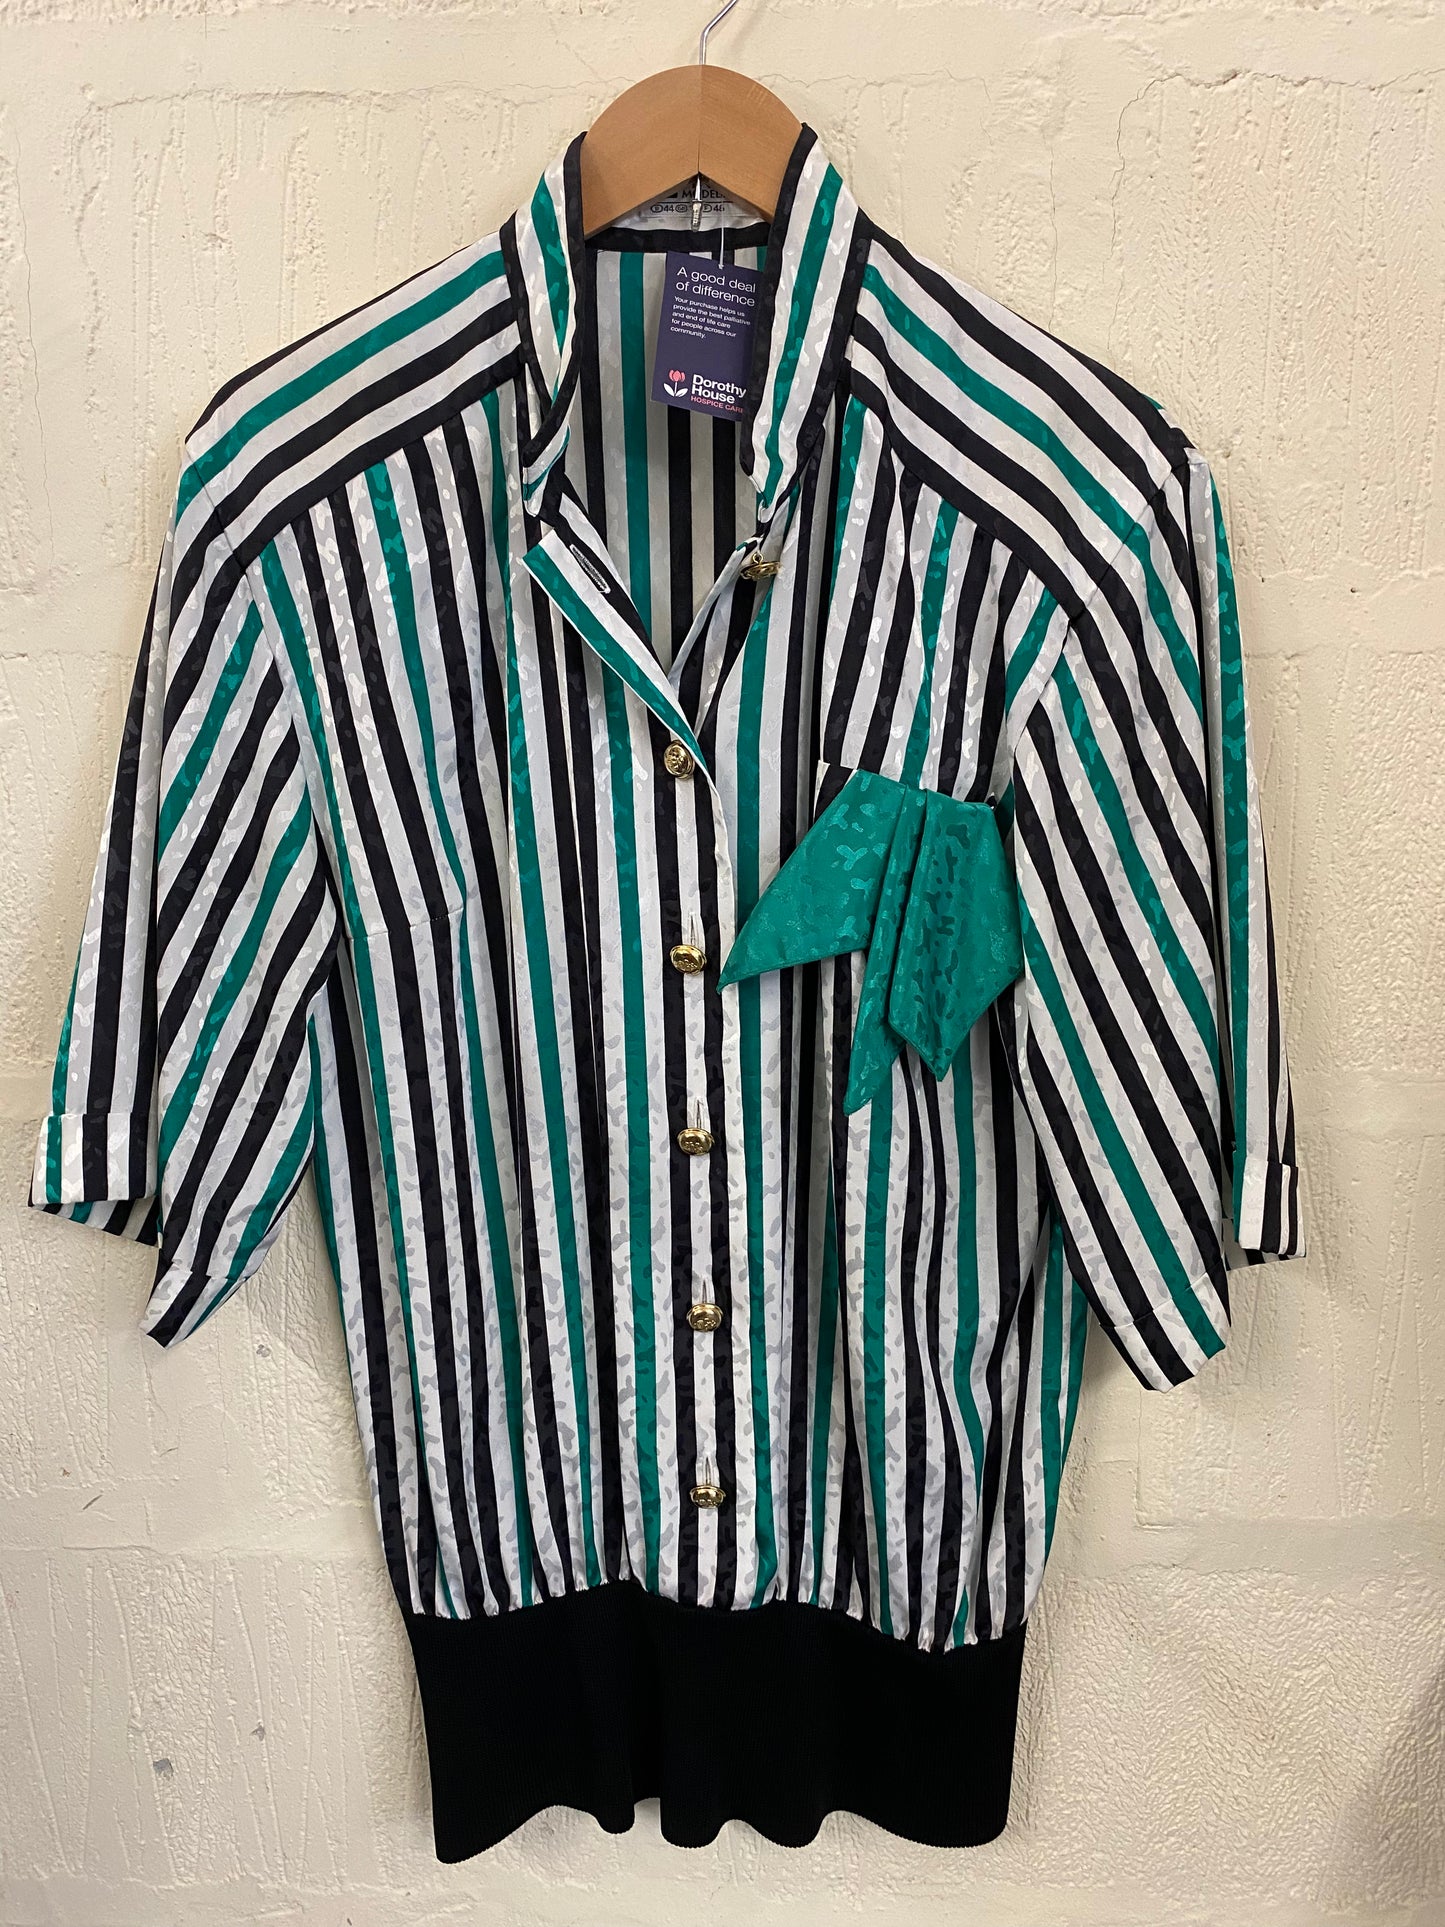 Vintage Fink 1980s Green and Black Striped Blouse Size 16